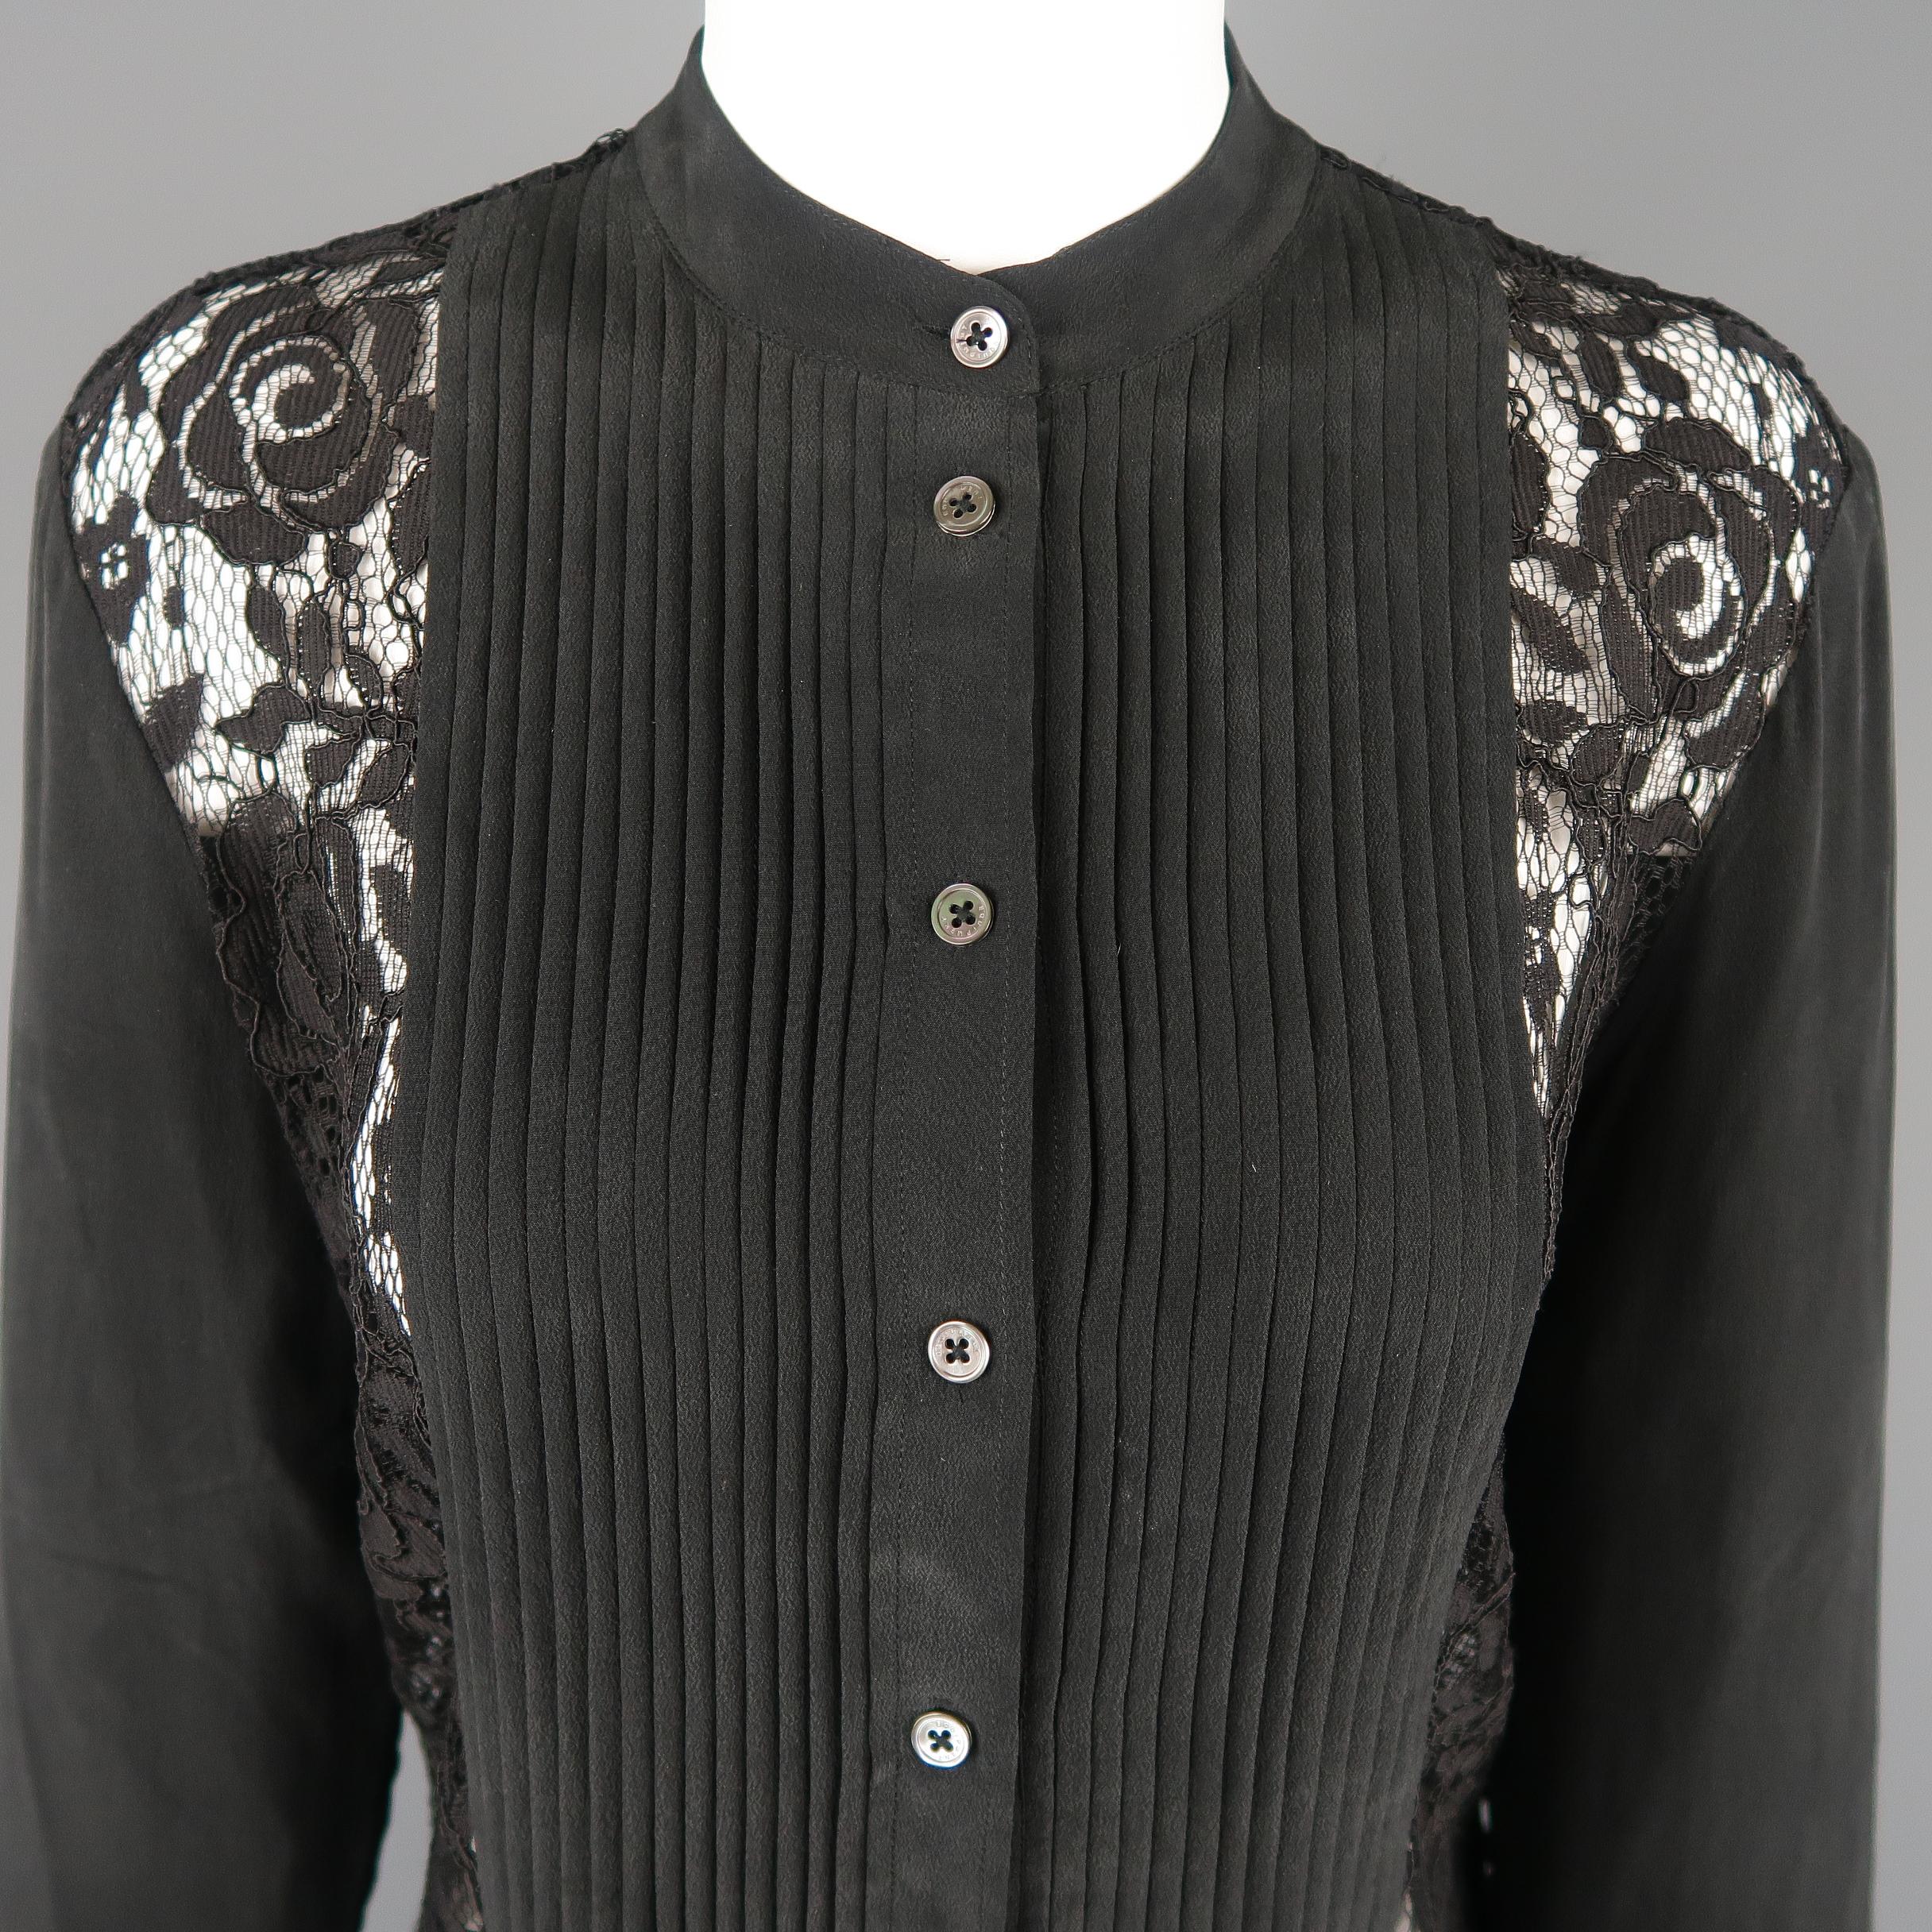 EQUIPMENT FEMME dress shirt comes in black rose lace with a band collar, button up front, silk sleeves, and silk pleated tuxedo bib panel.
 
Excellent Pre-Owned Condition.
Marked: XS
 
Measurements:
 
Shoulder: 16 in.
Bust: 40 in.
Sleeve: 23